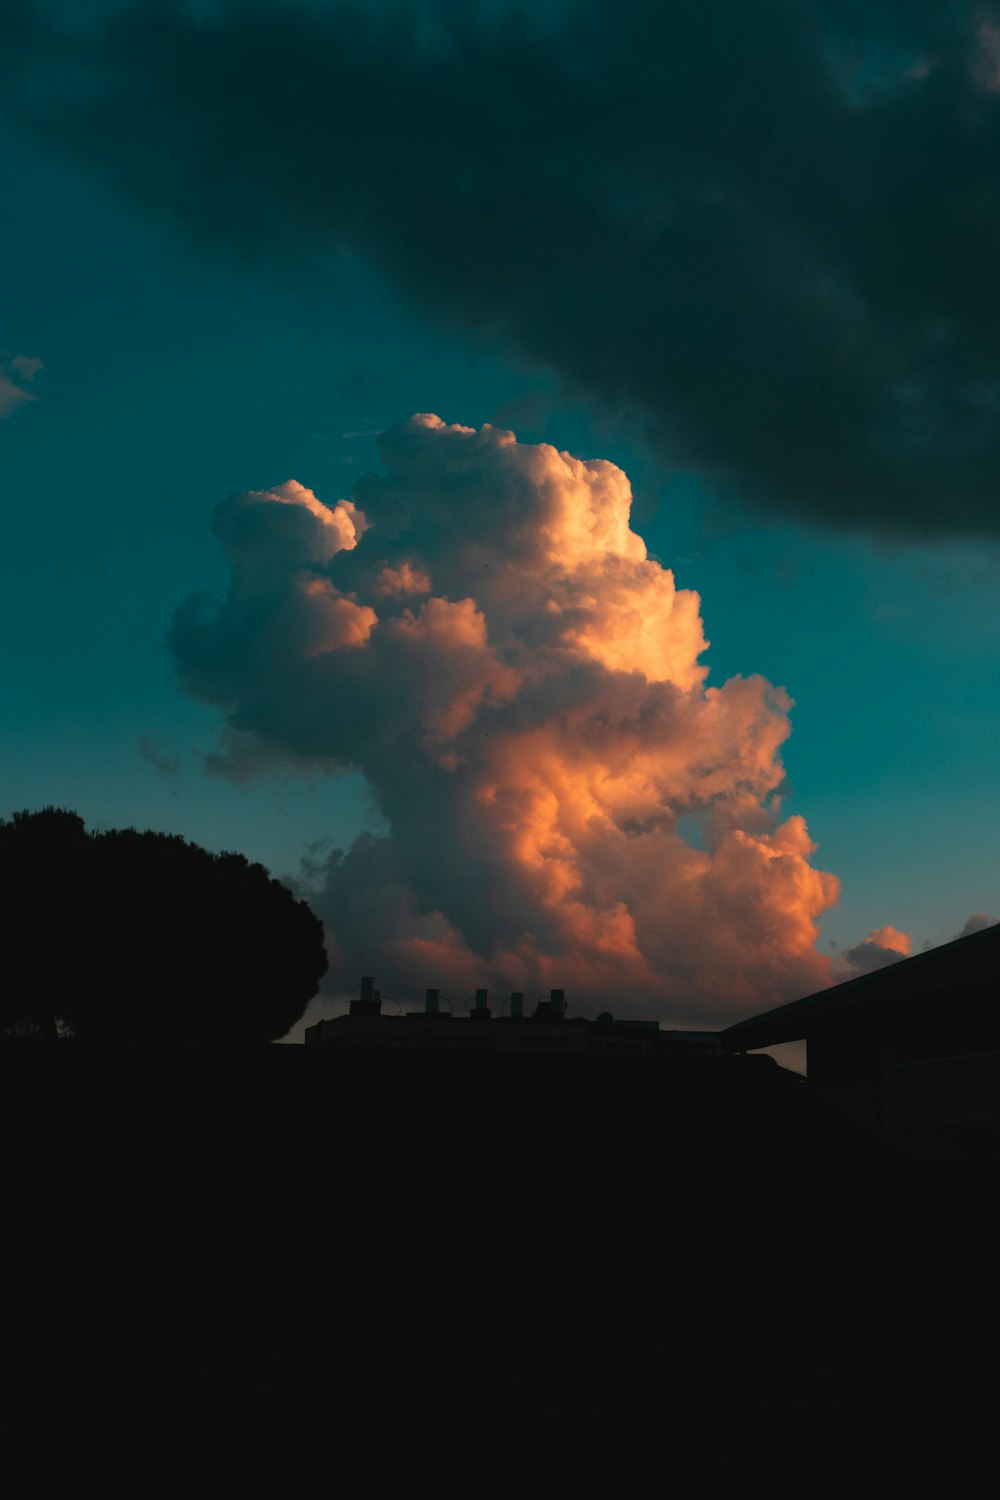 a large cloud is in the sky above a house